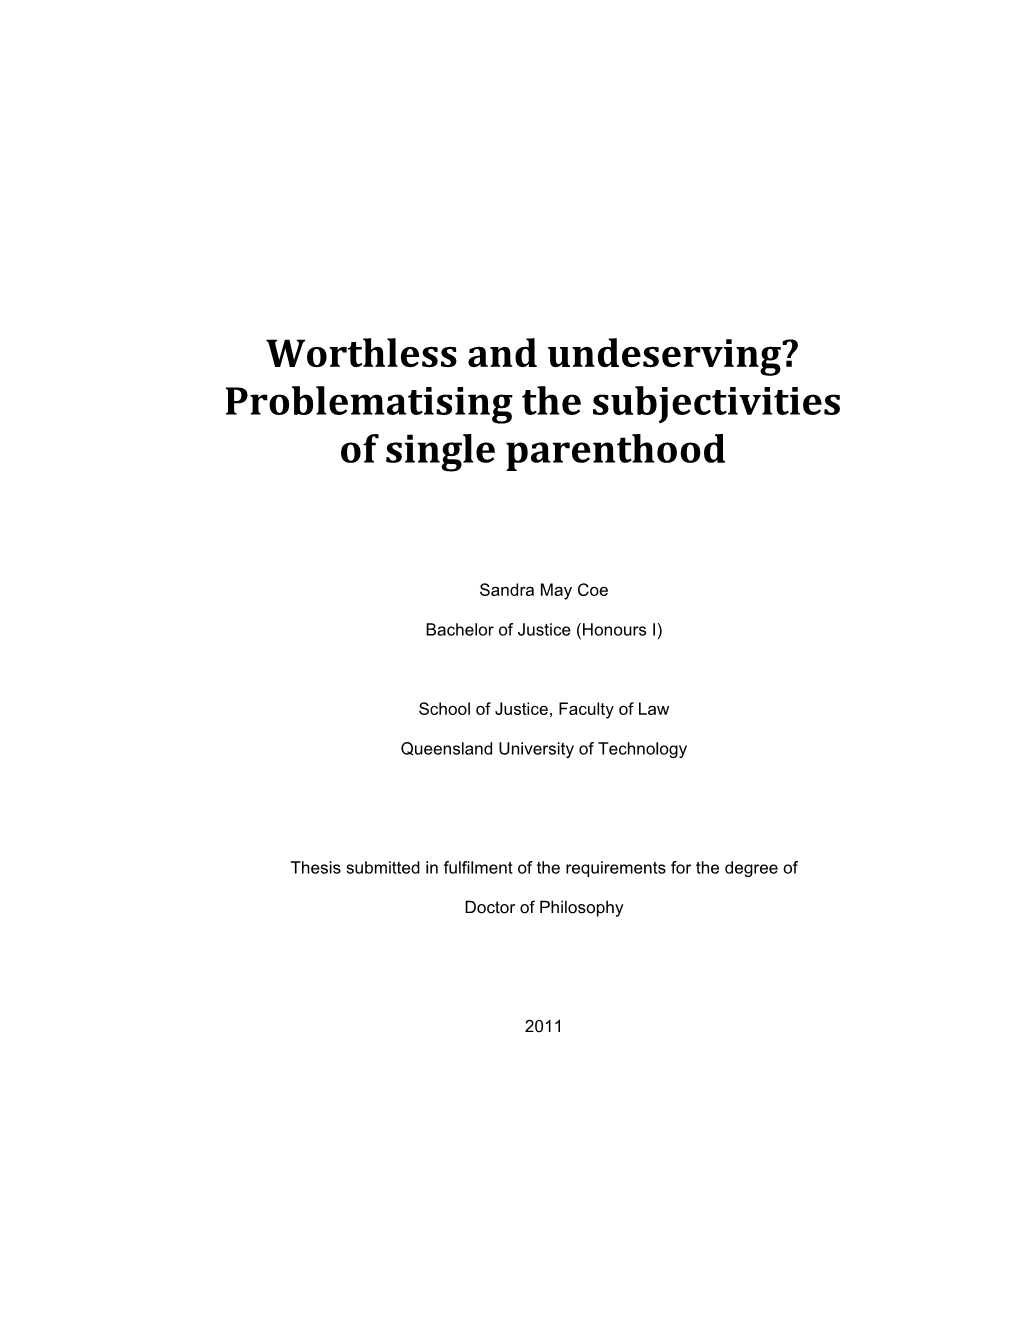 Problematising the Subjectivities of Single Parenthood